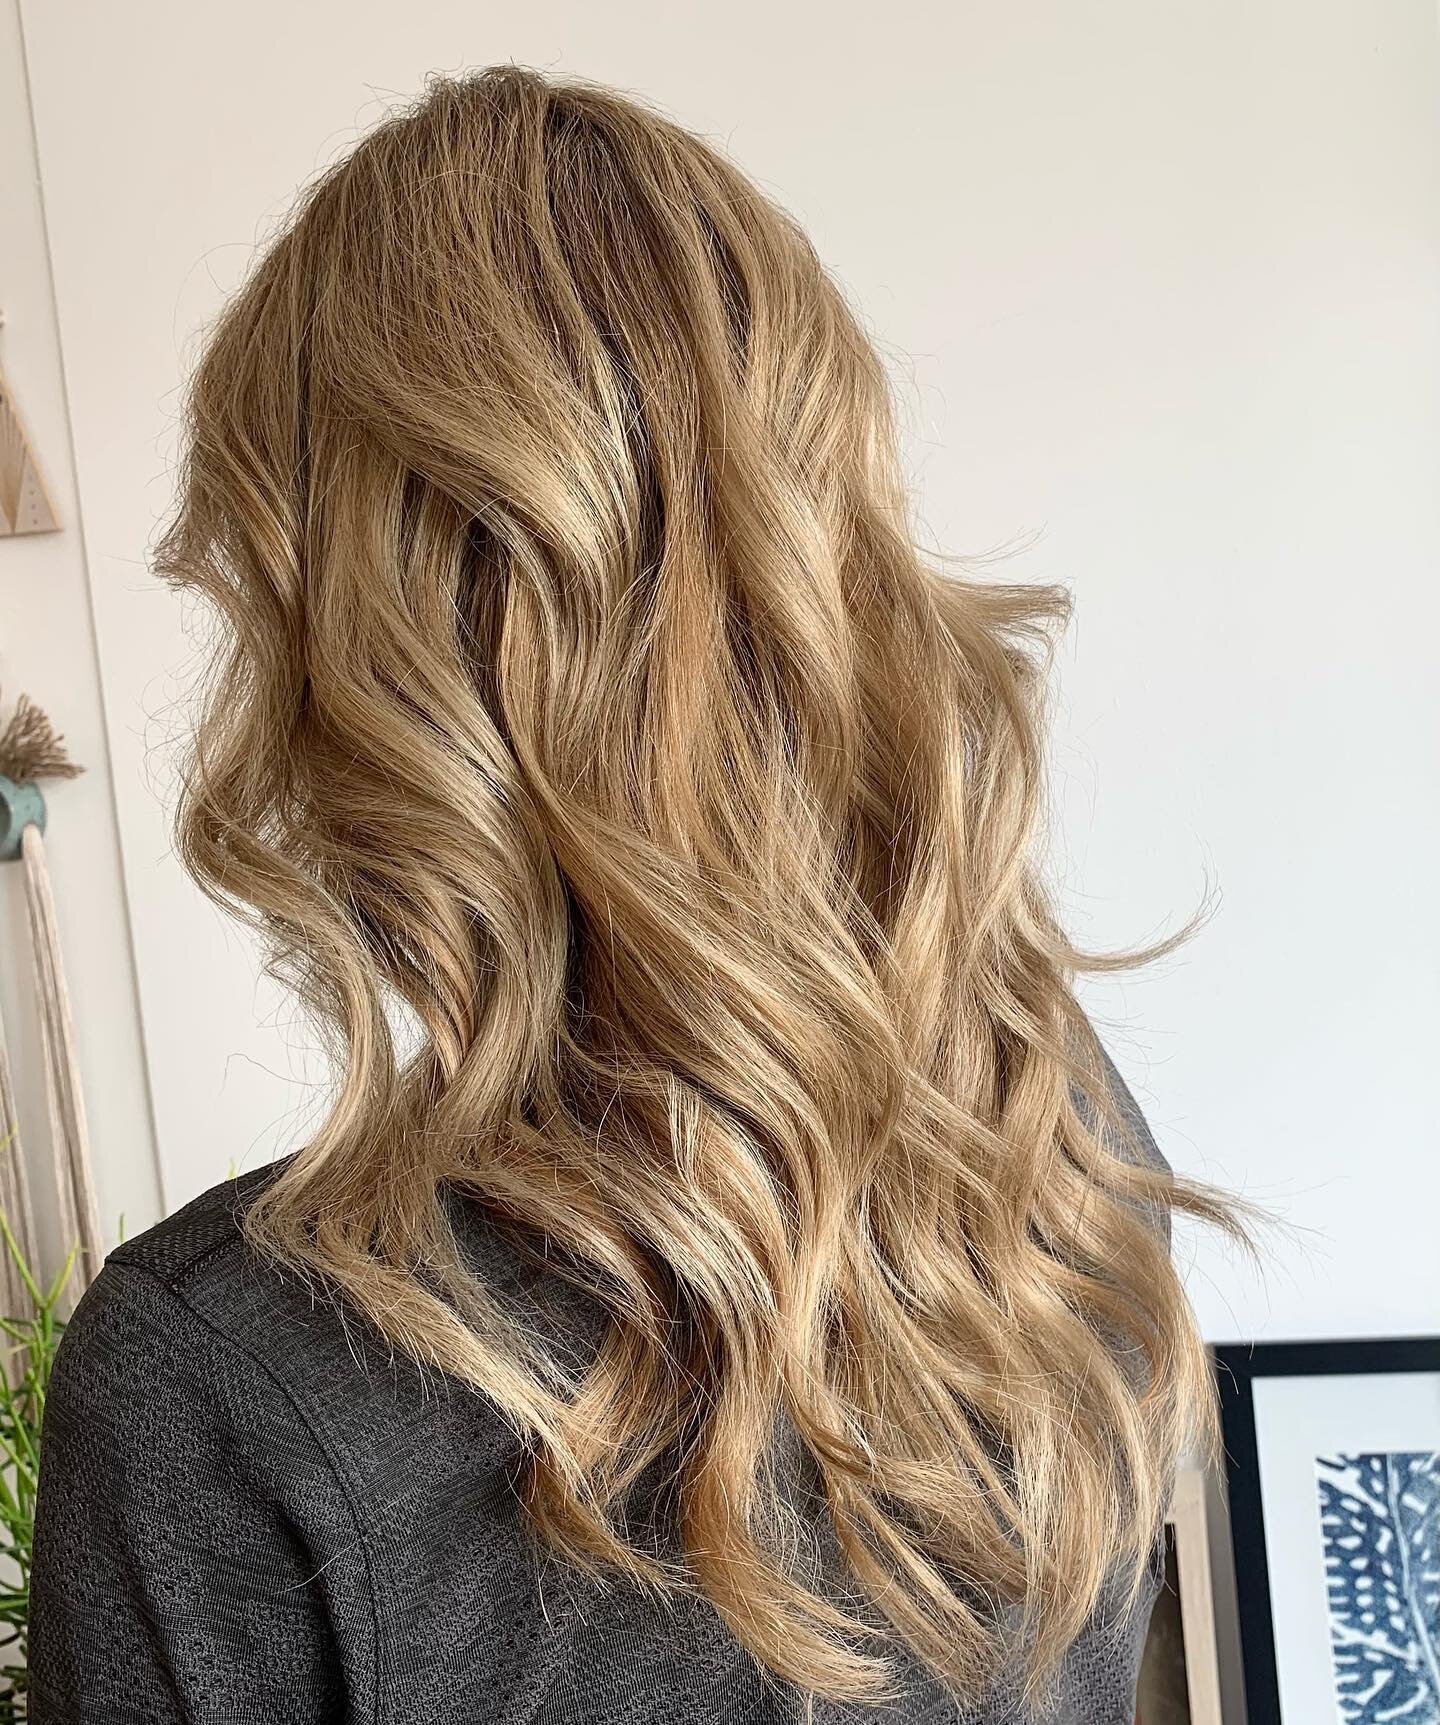 I am grateful for my guests/friends that bring positive energy into my salon. Today is a good day❤️ Oway Hcolor and a haircut today! #hcolor #owayorganics #libertyvillesalon #libertyvillehairstylist #goodhairday #blondehair #owayofficial